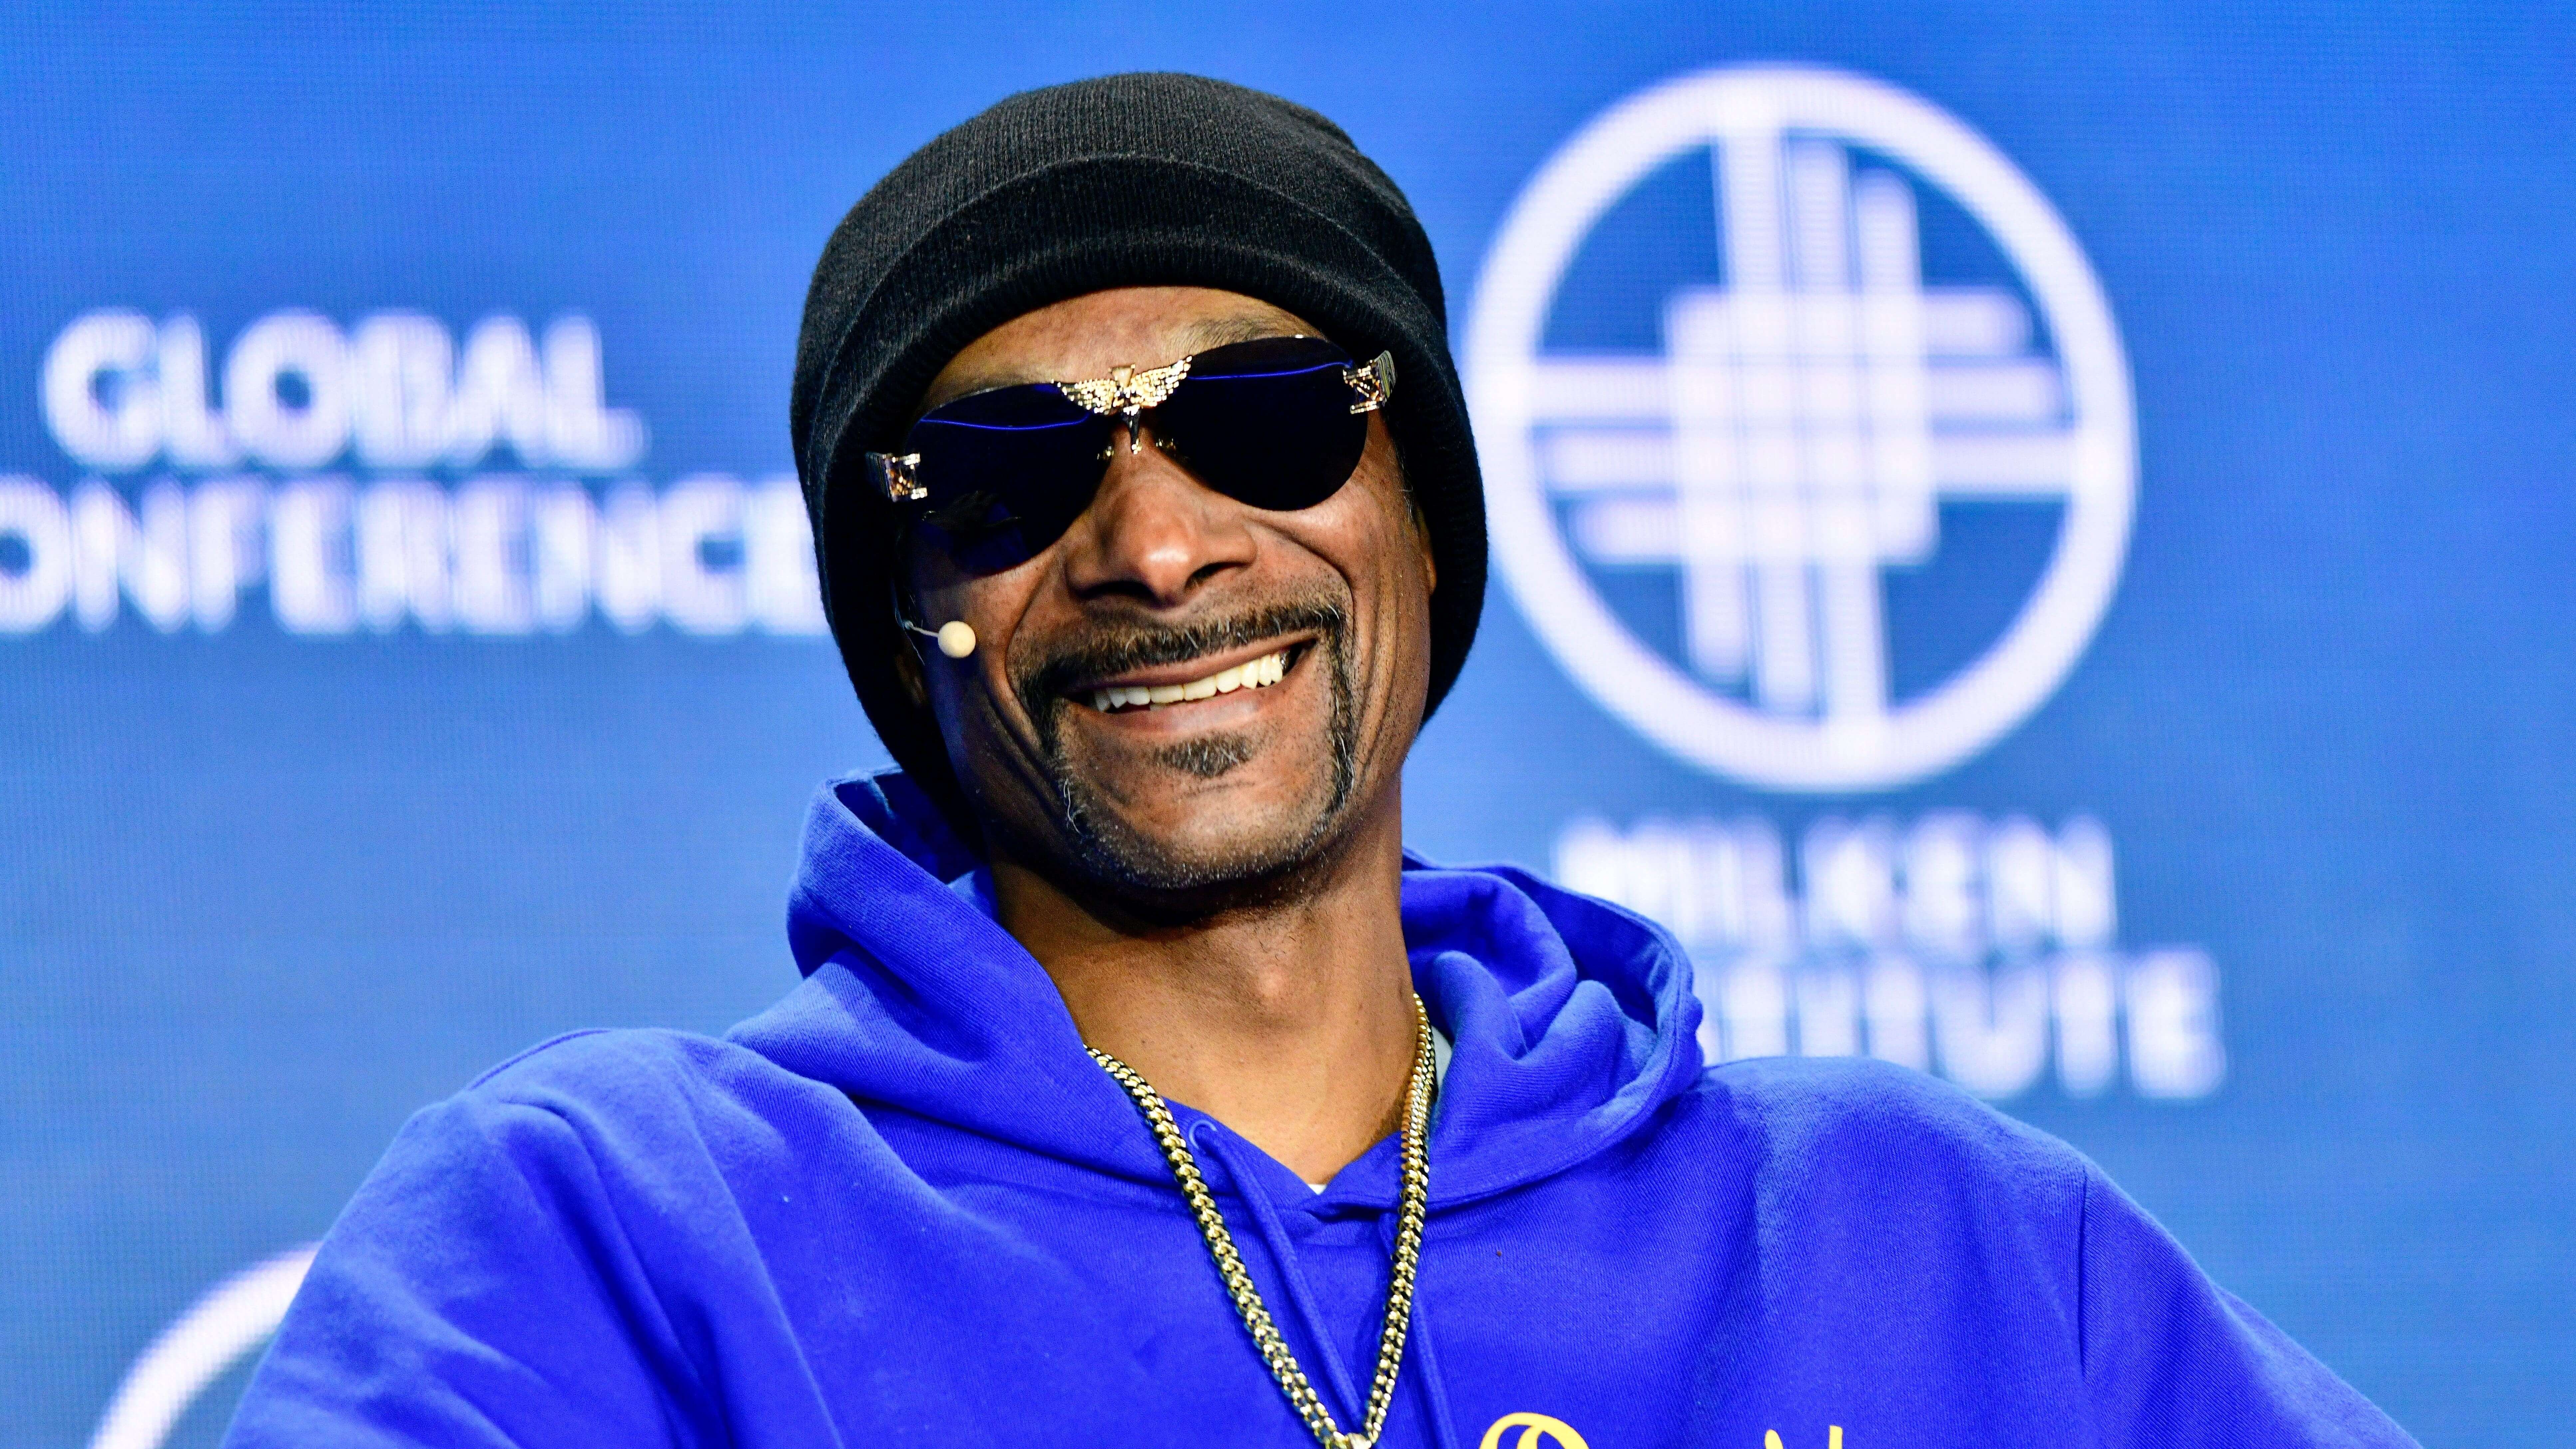 Snoop Dogg assures world he could make $100 million by getting his “thang” out on OnlyFans…but won’t